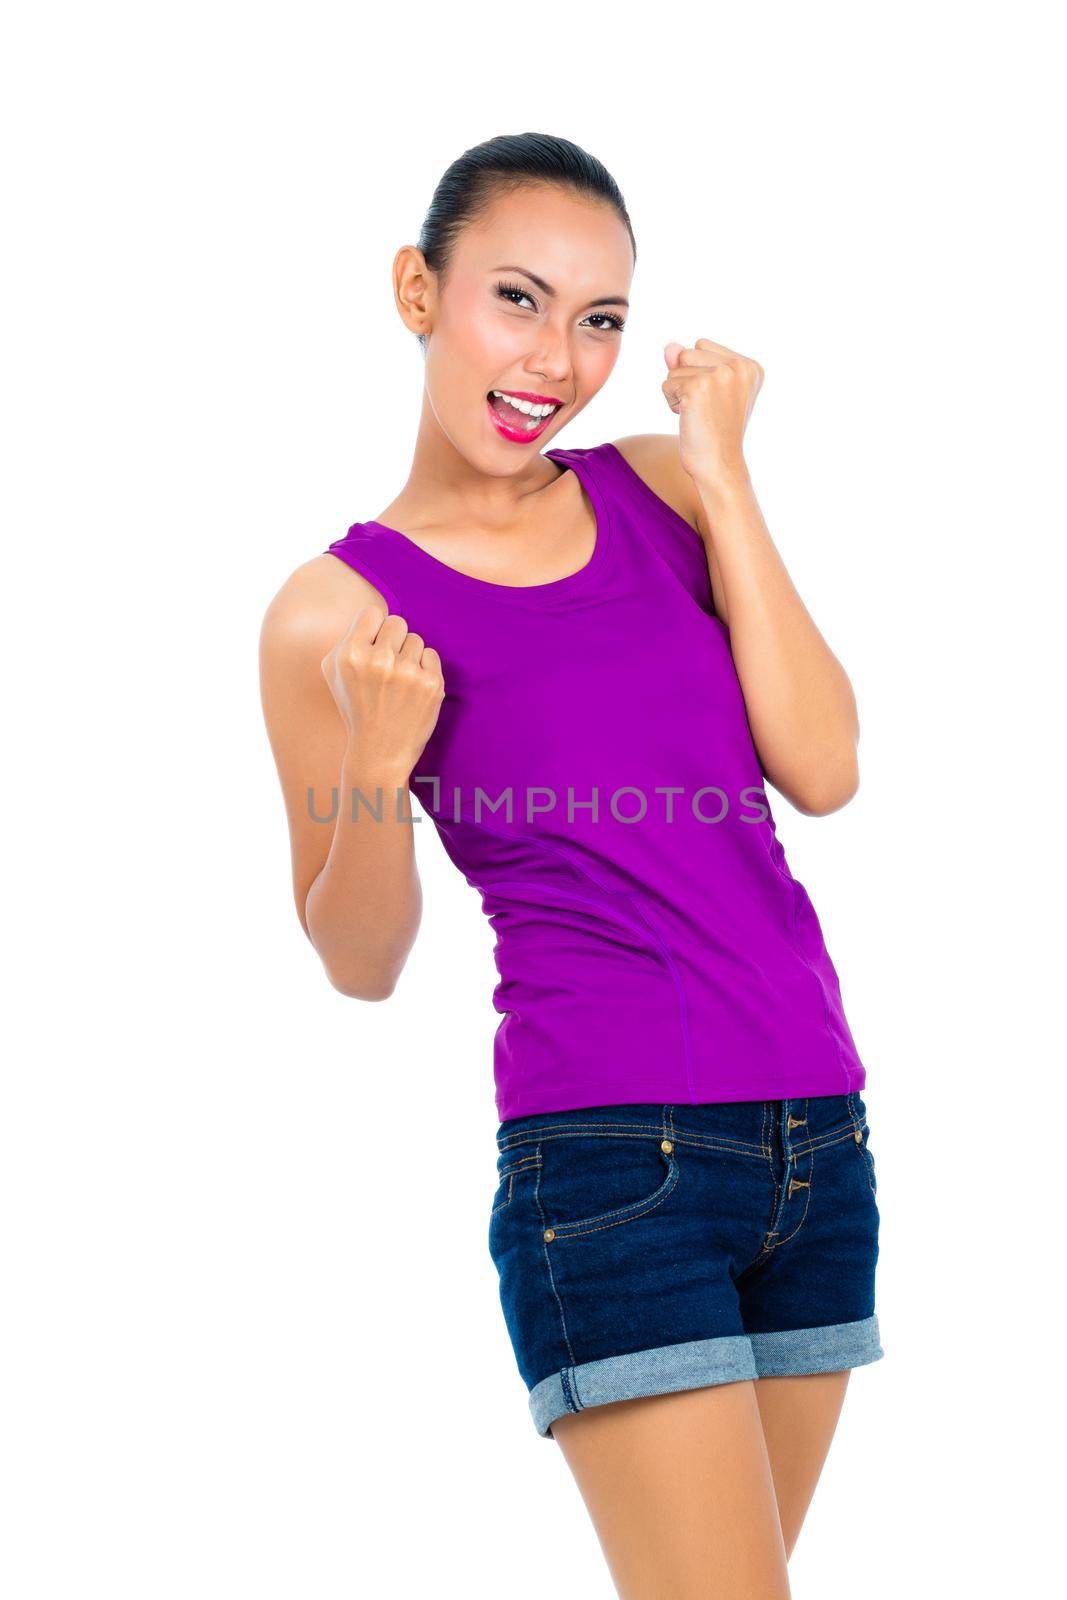 Happy woman clenching her fist over white background